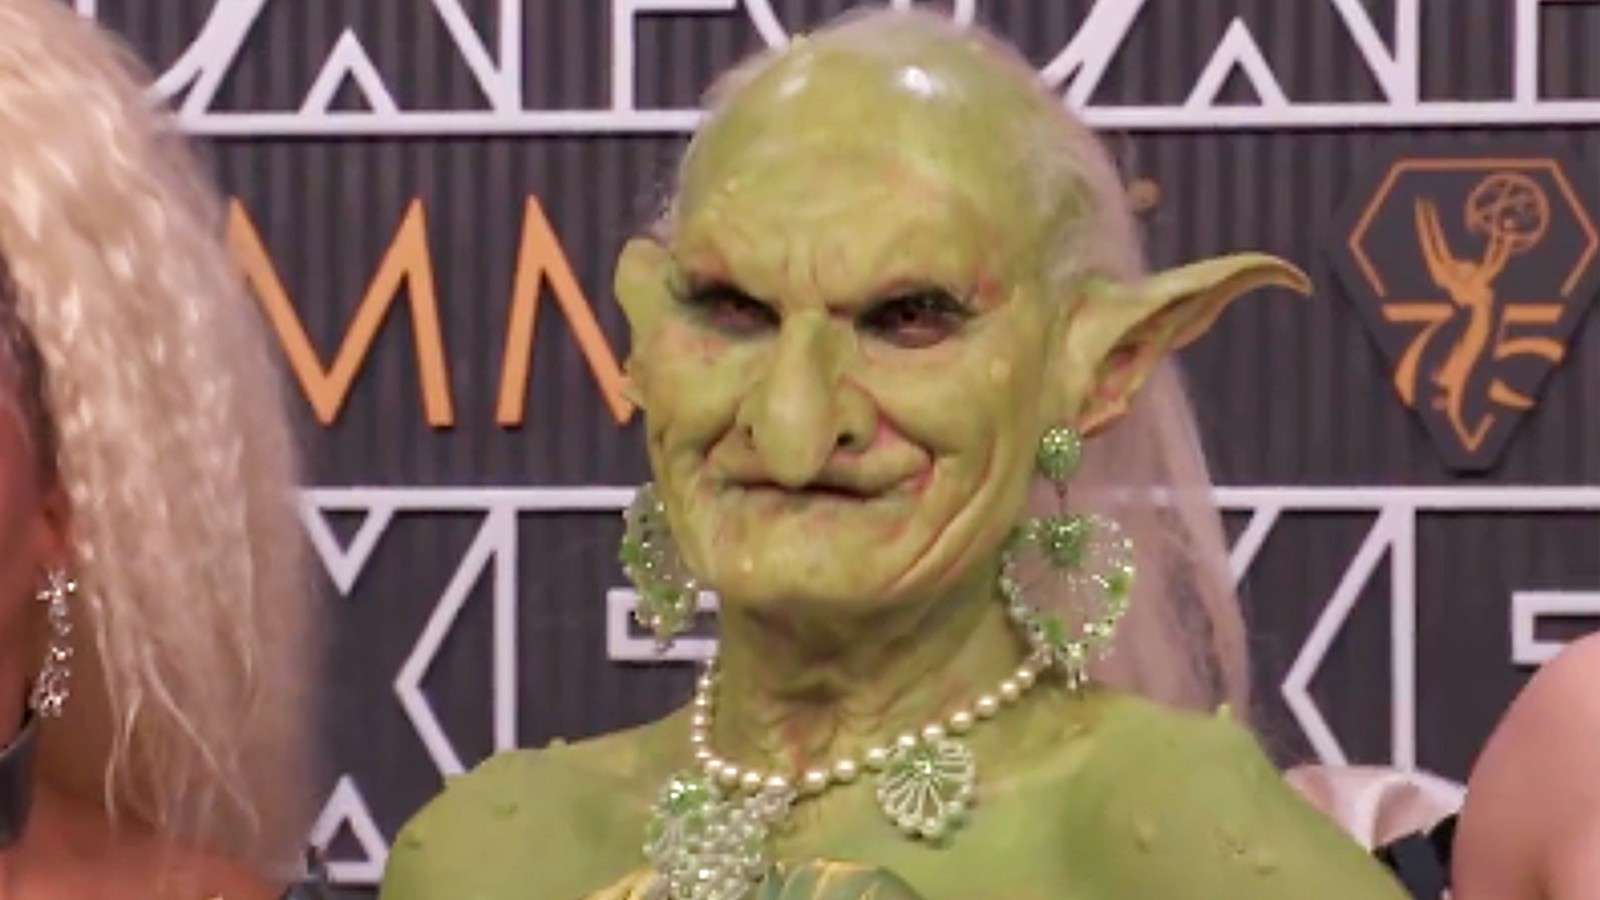 Princess Poppy dressed as a green goblin at the Emmys